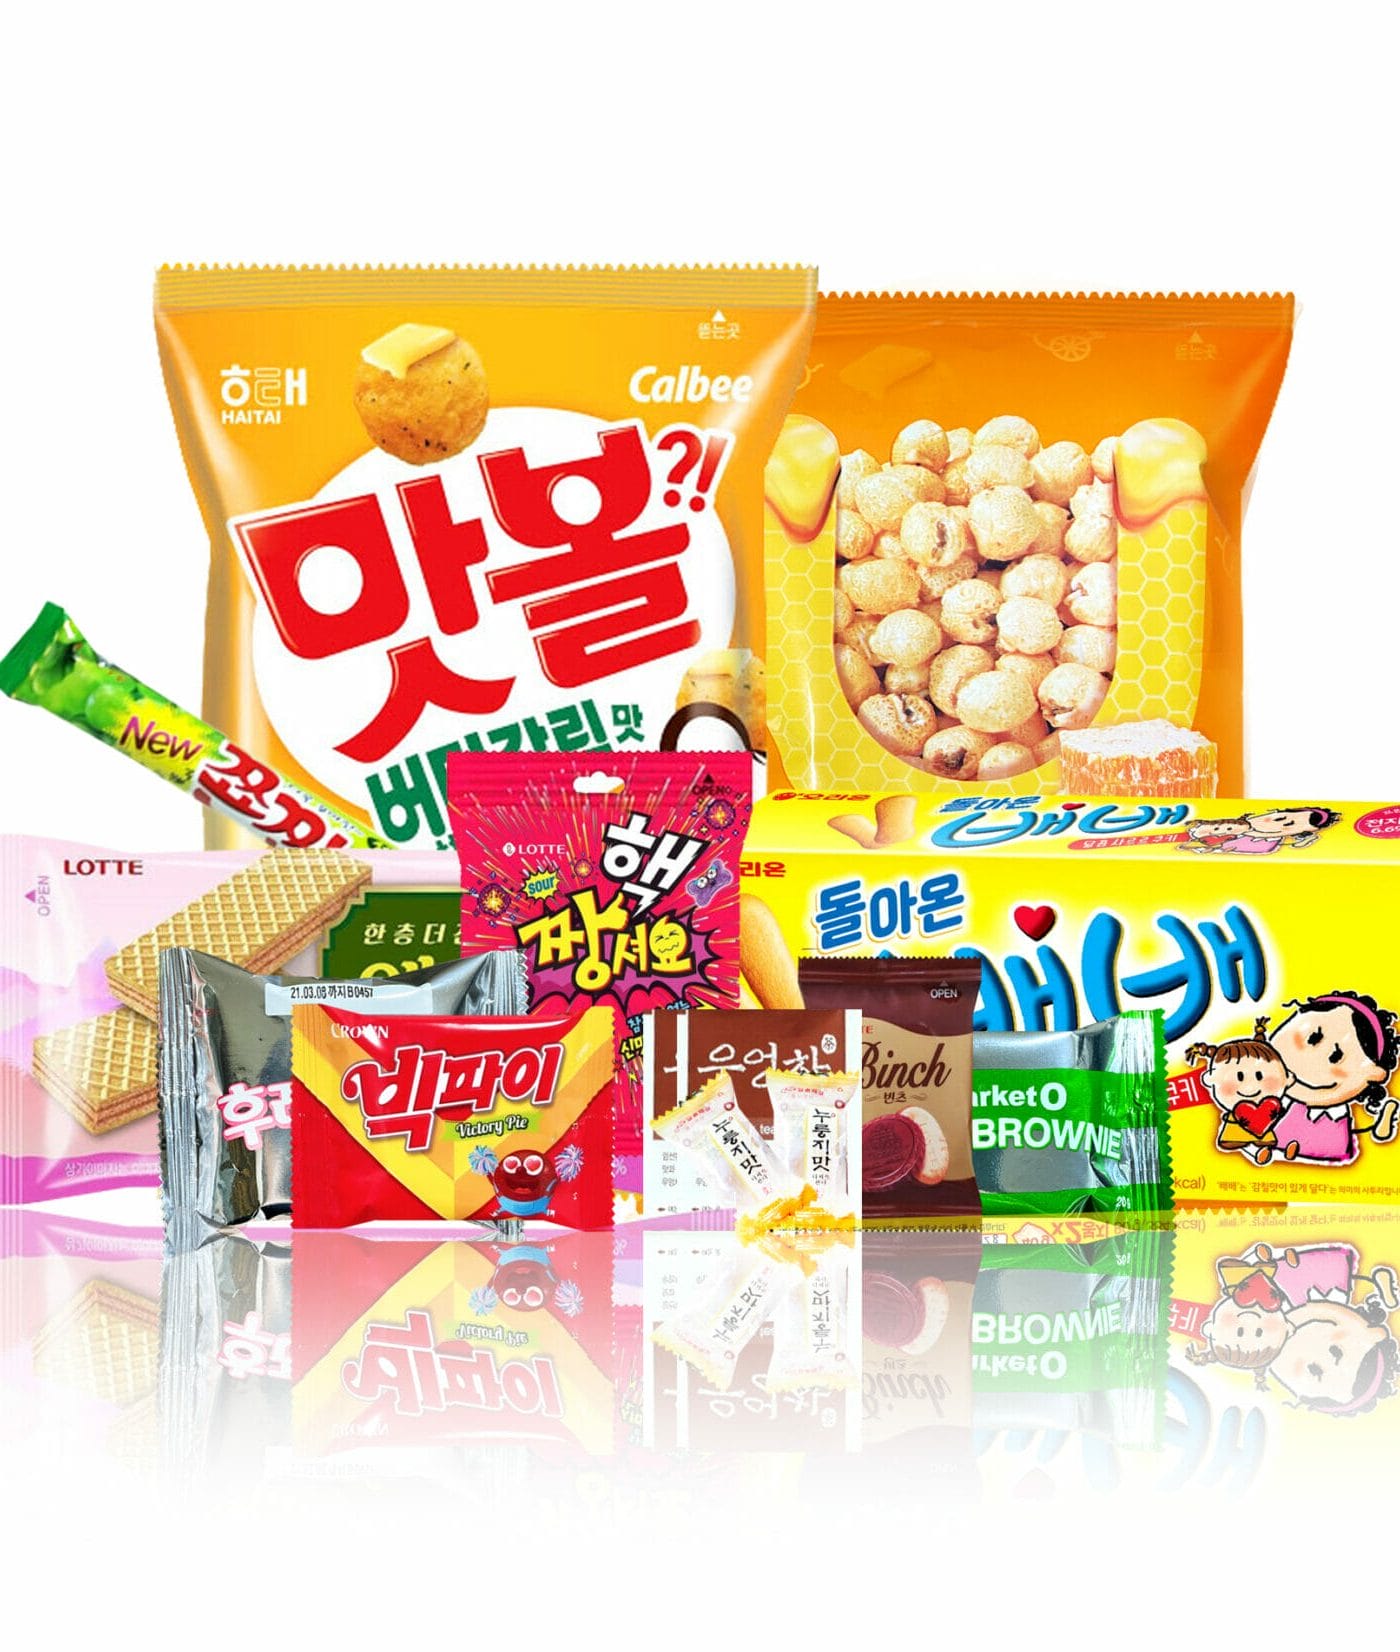 Example contents from Korea Snack Box